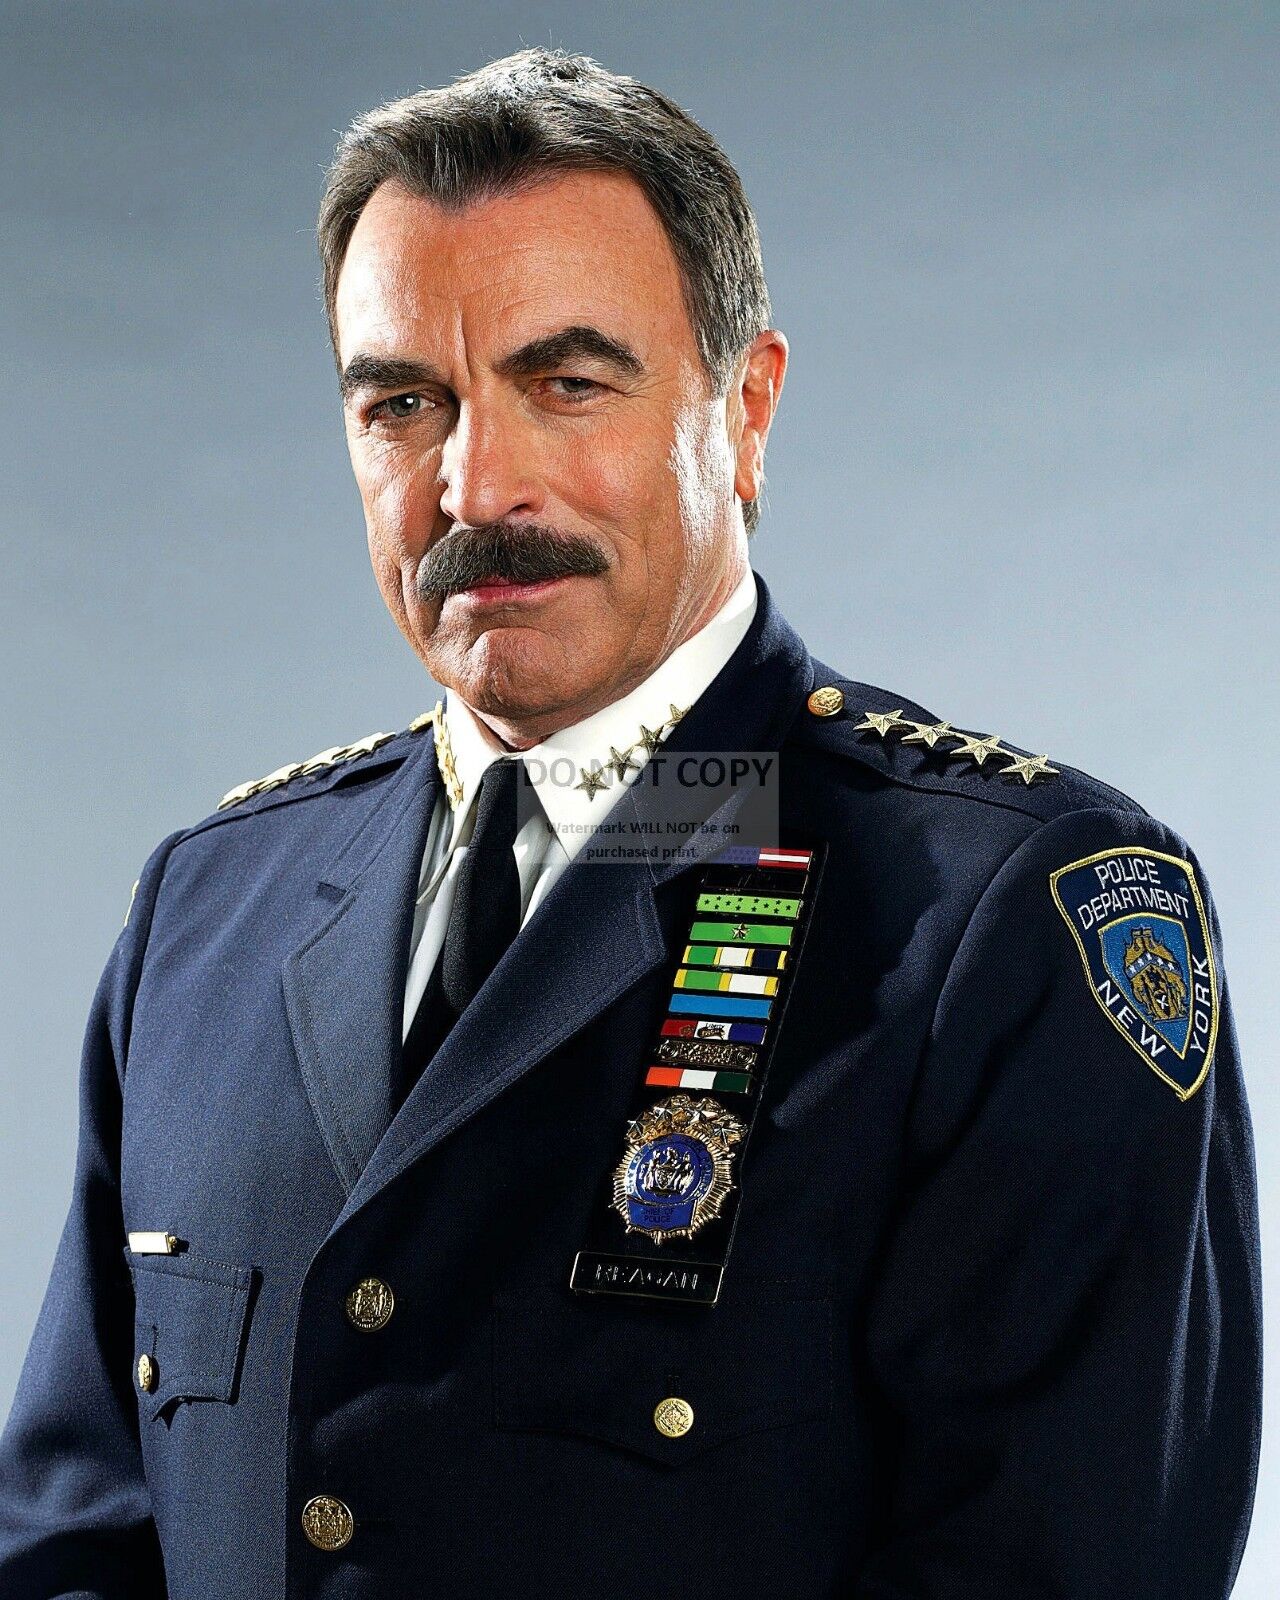 TOM SELLECK IN THE TV SERIES 